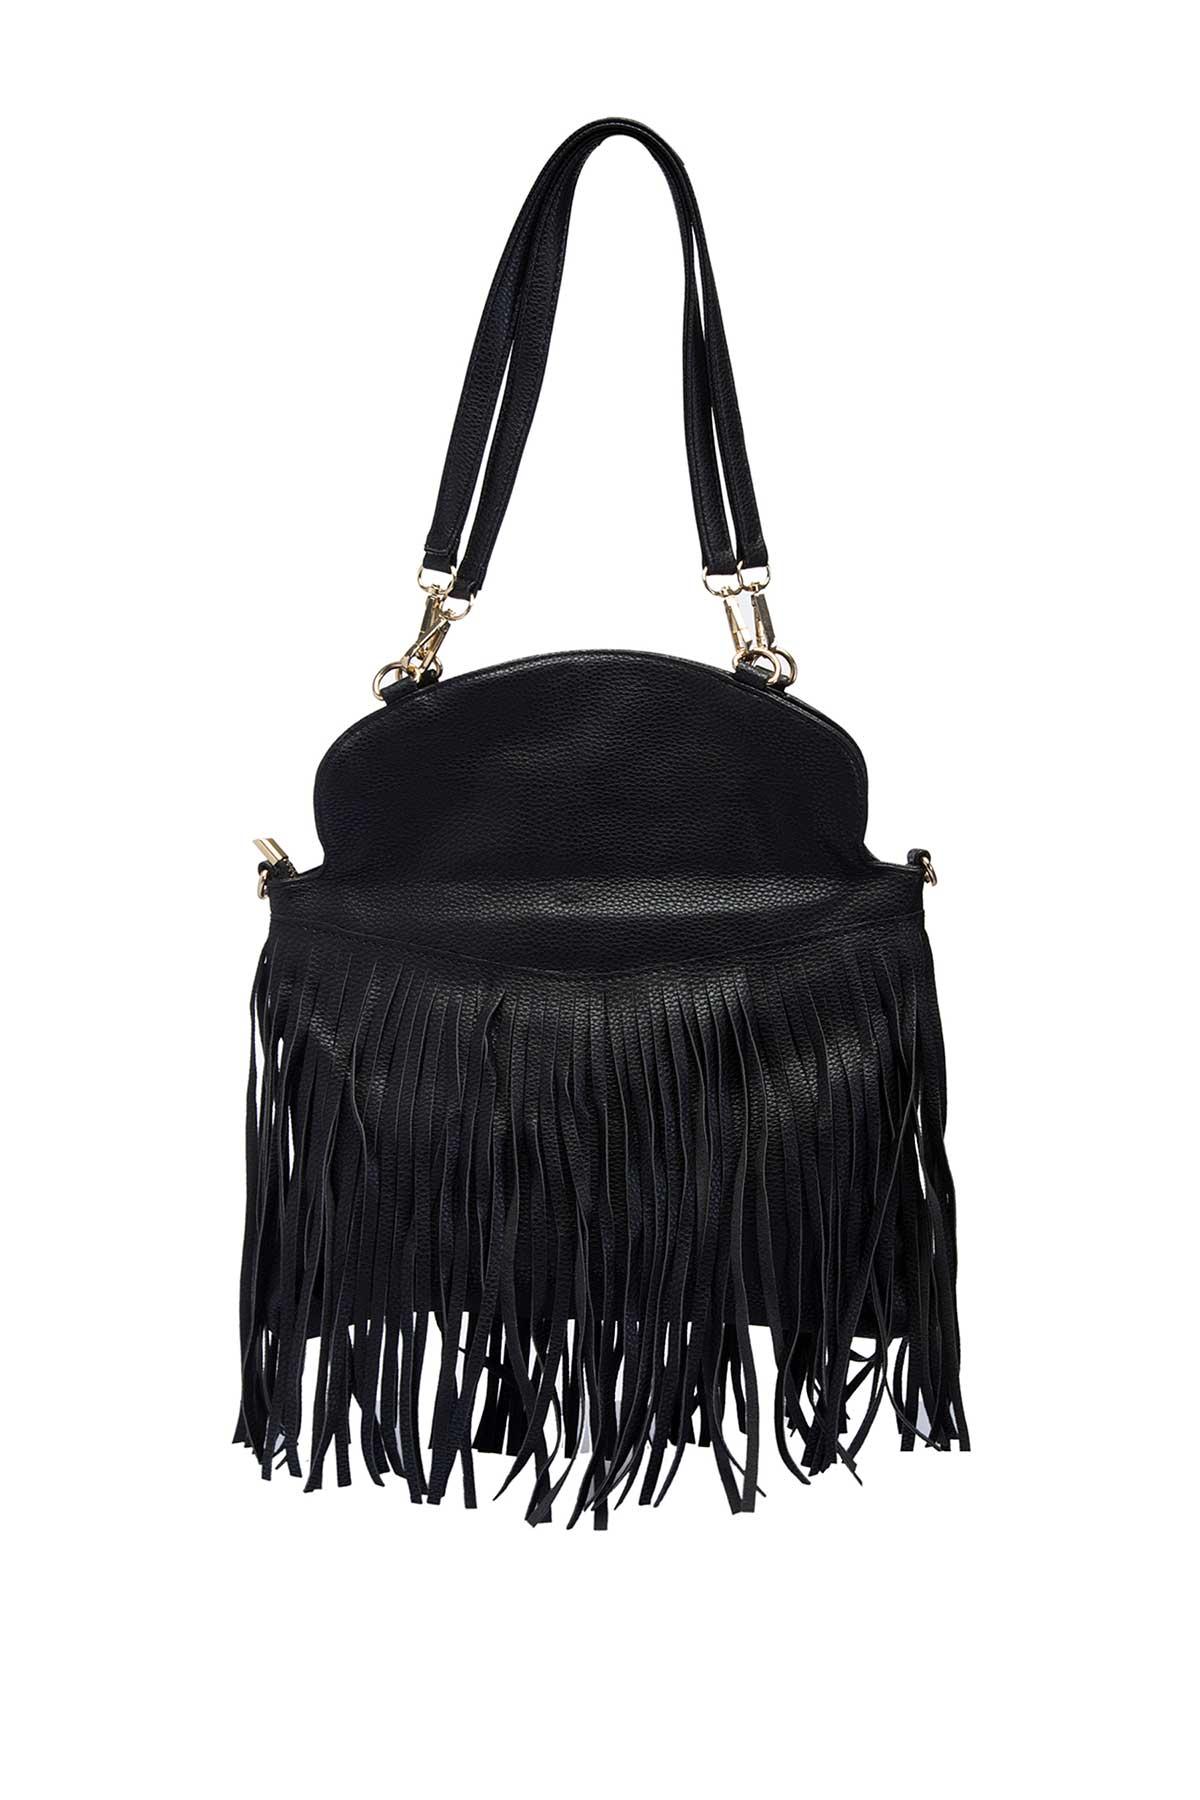 Amazon.com: KEEPOP Hobo Bags for Women PU Leather Tassels Shoulder Bag  Vintage Purse Slouchy Handbag with Zipper Tote Top-Handle Satchel :  Clothing, Shoes & Jewelry